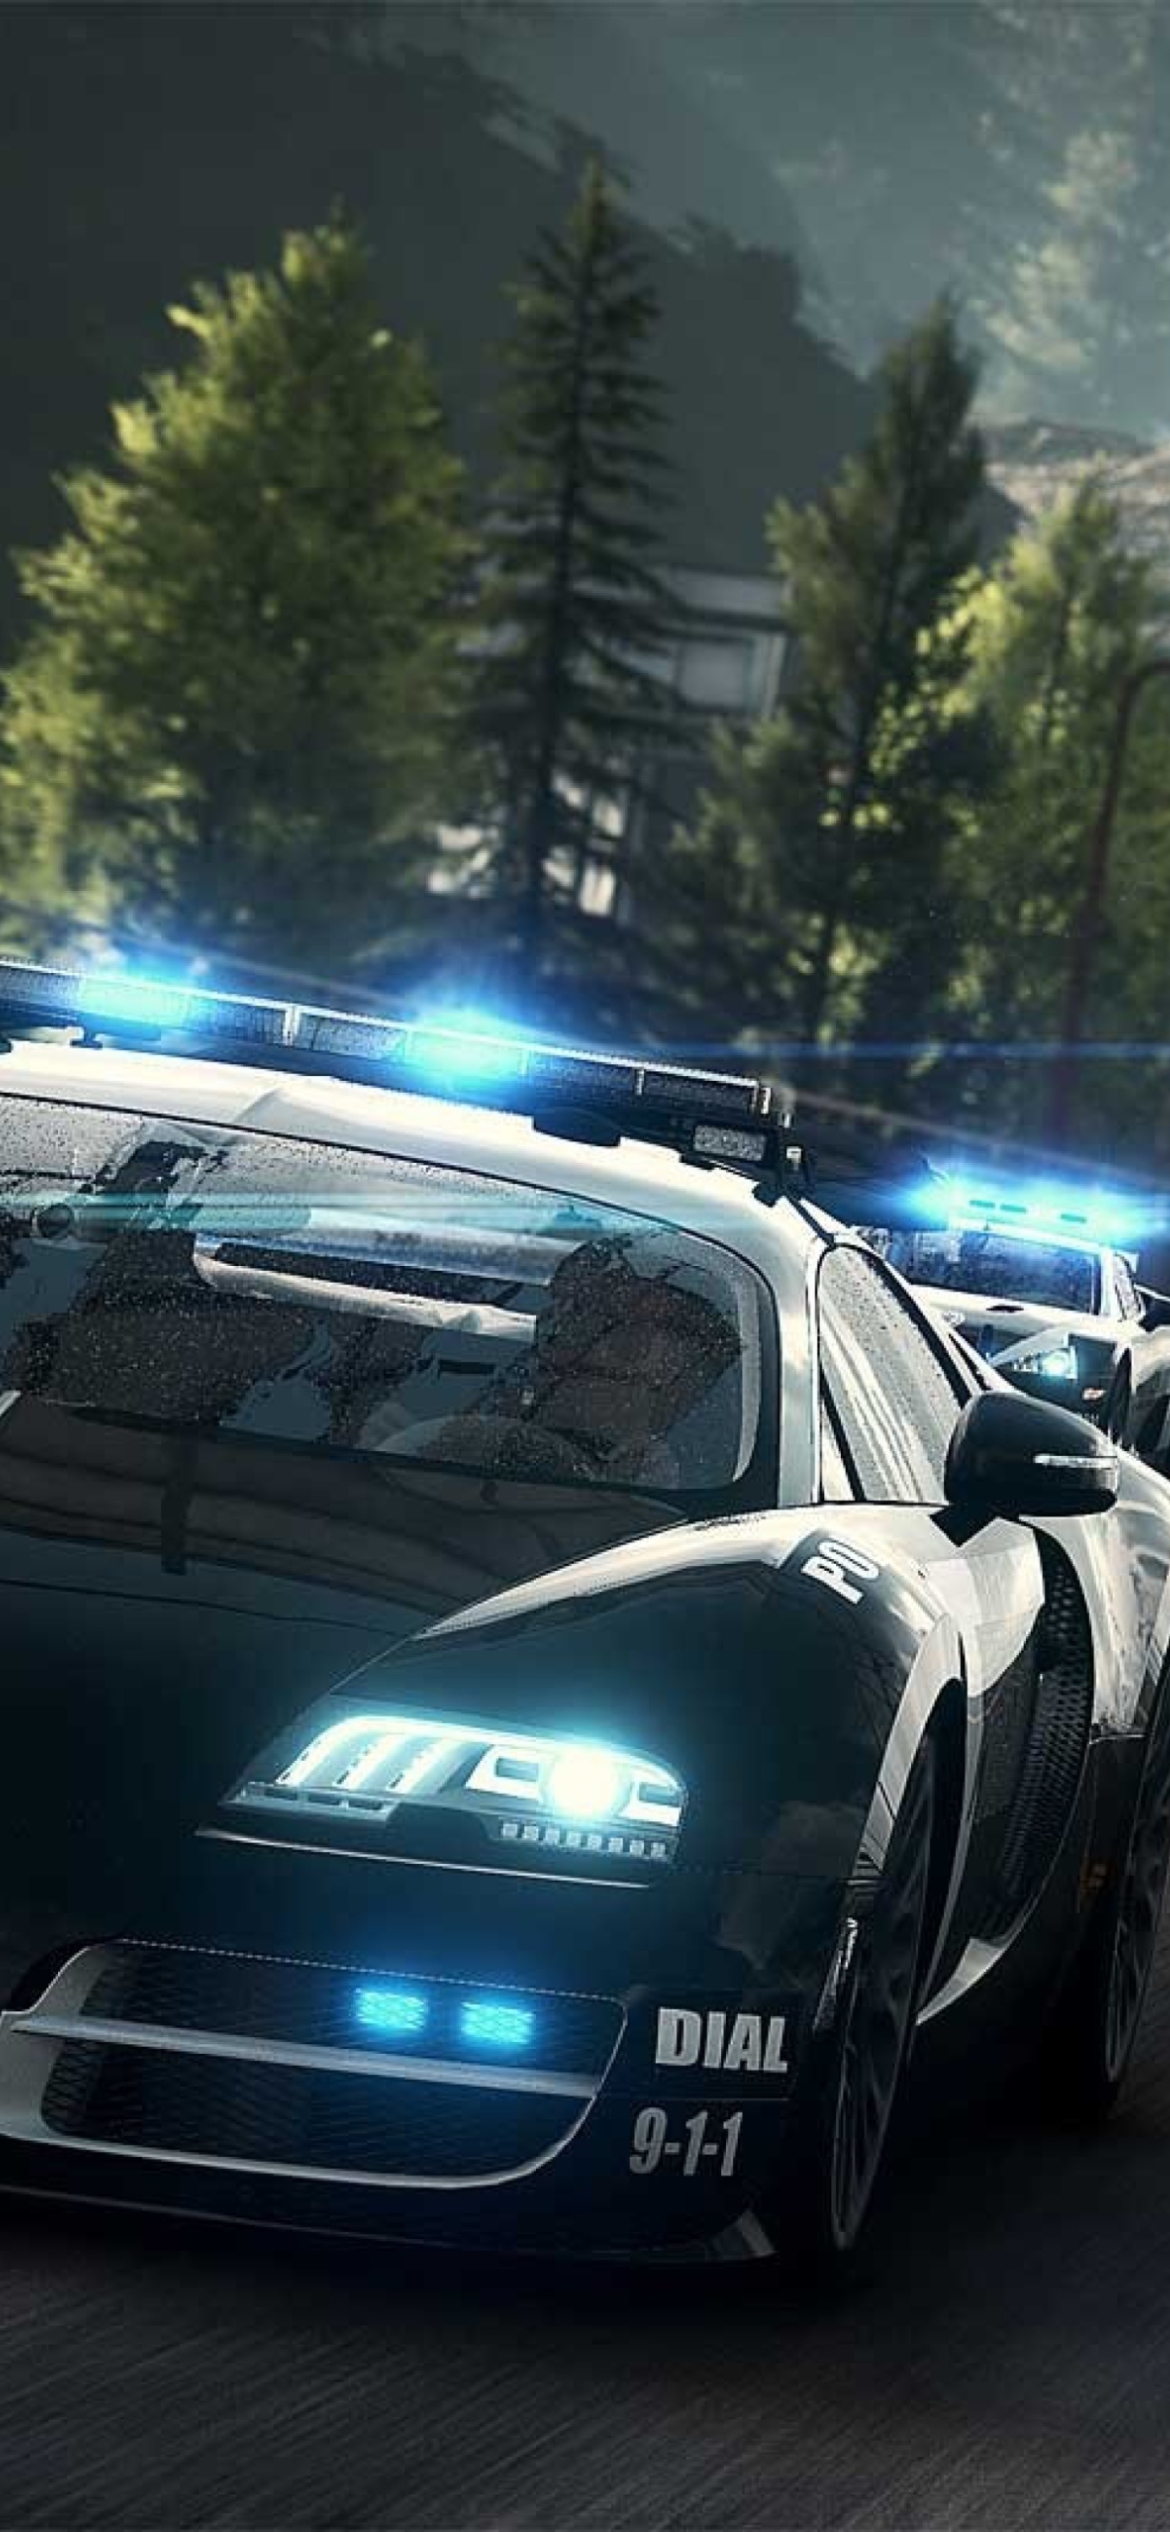 Das Need For Speed Wallpaper 1170x2532